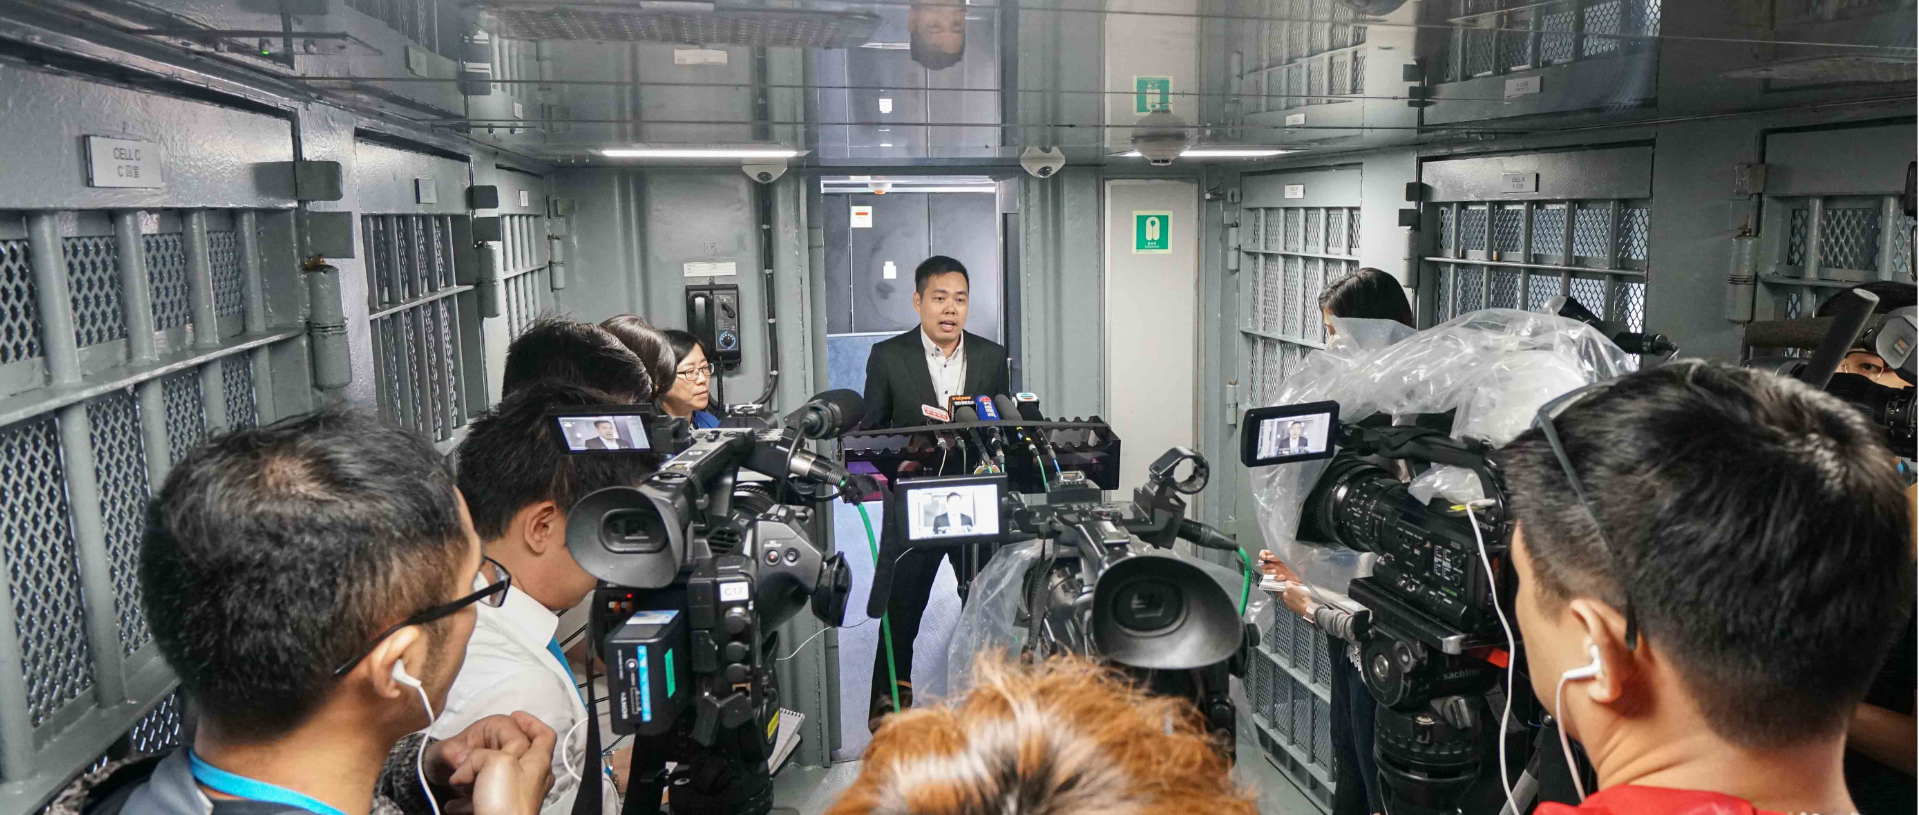 Public Relations Unit arranges for the media to visit the new ‘Seaward’ which conveys persons in custody.  A correctional officer introduces the latest facilities of the vessel.